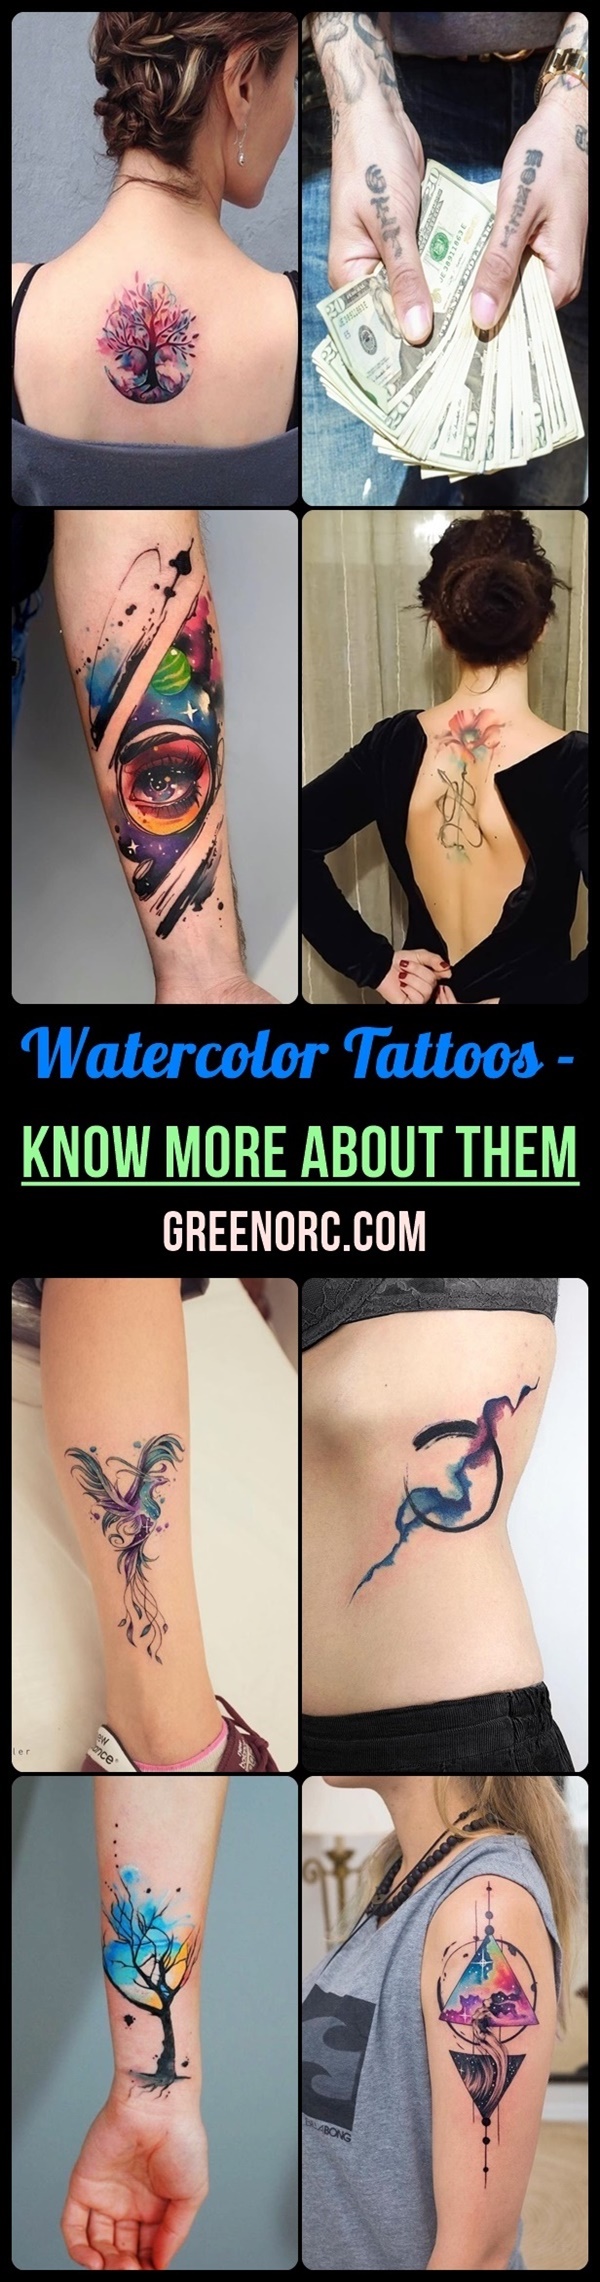 Watercolor Tattoos - Know More About Them